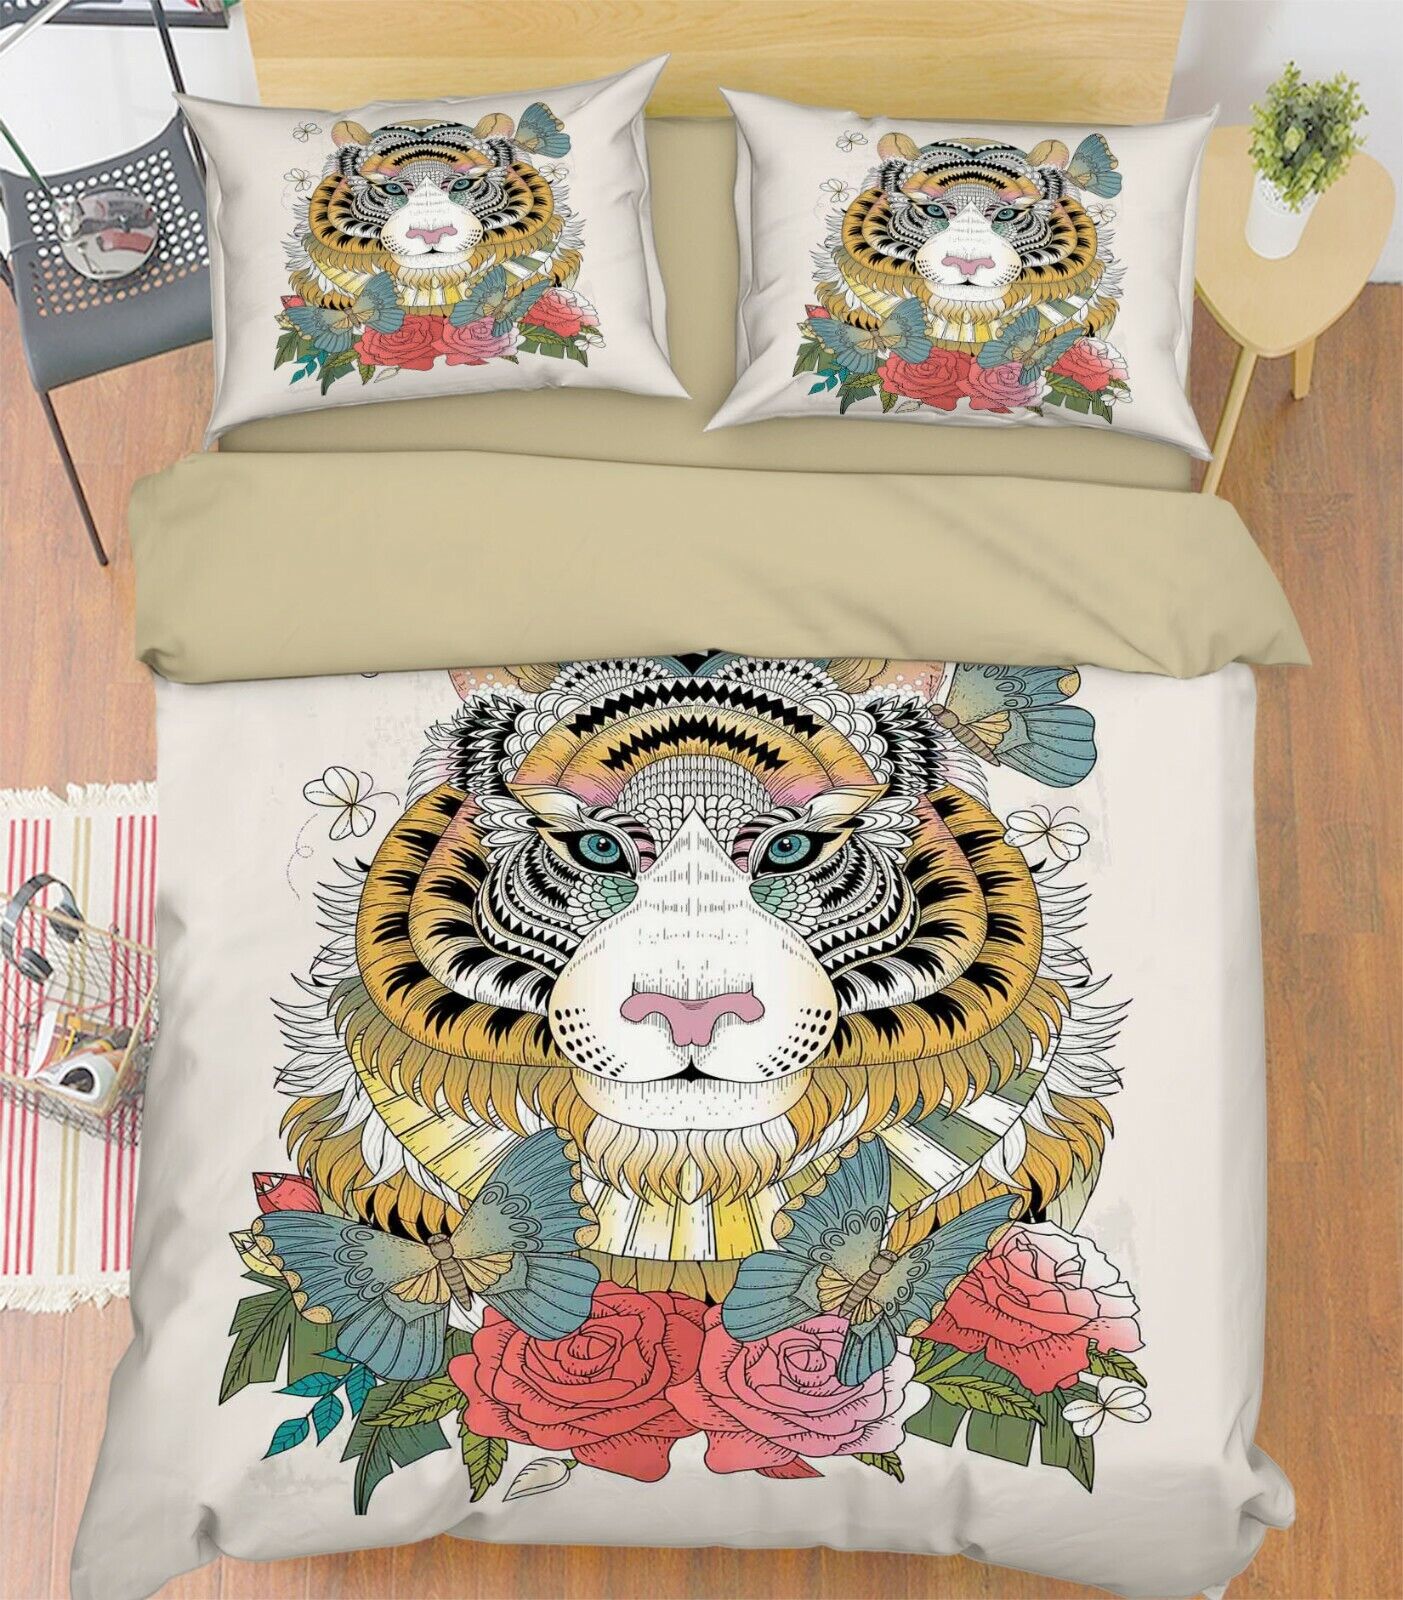 3D Hand Painted Tiger KER2140 Bed Pillowcases Quilt Duvet Cover Double Kay Nowy wygląd pracy, zysk